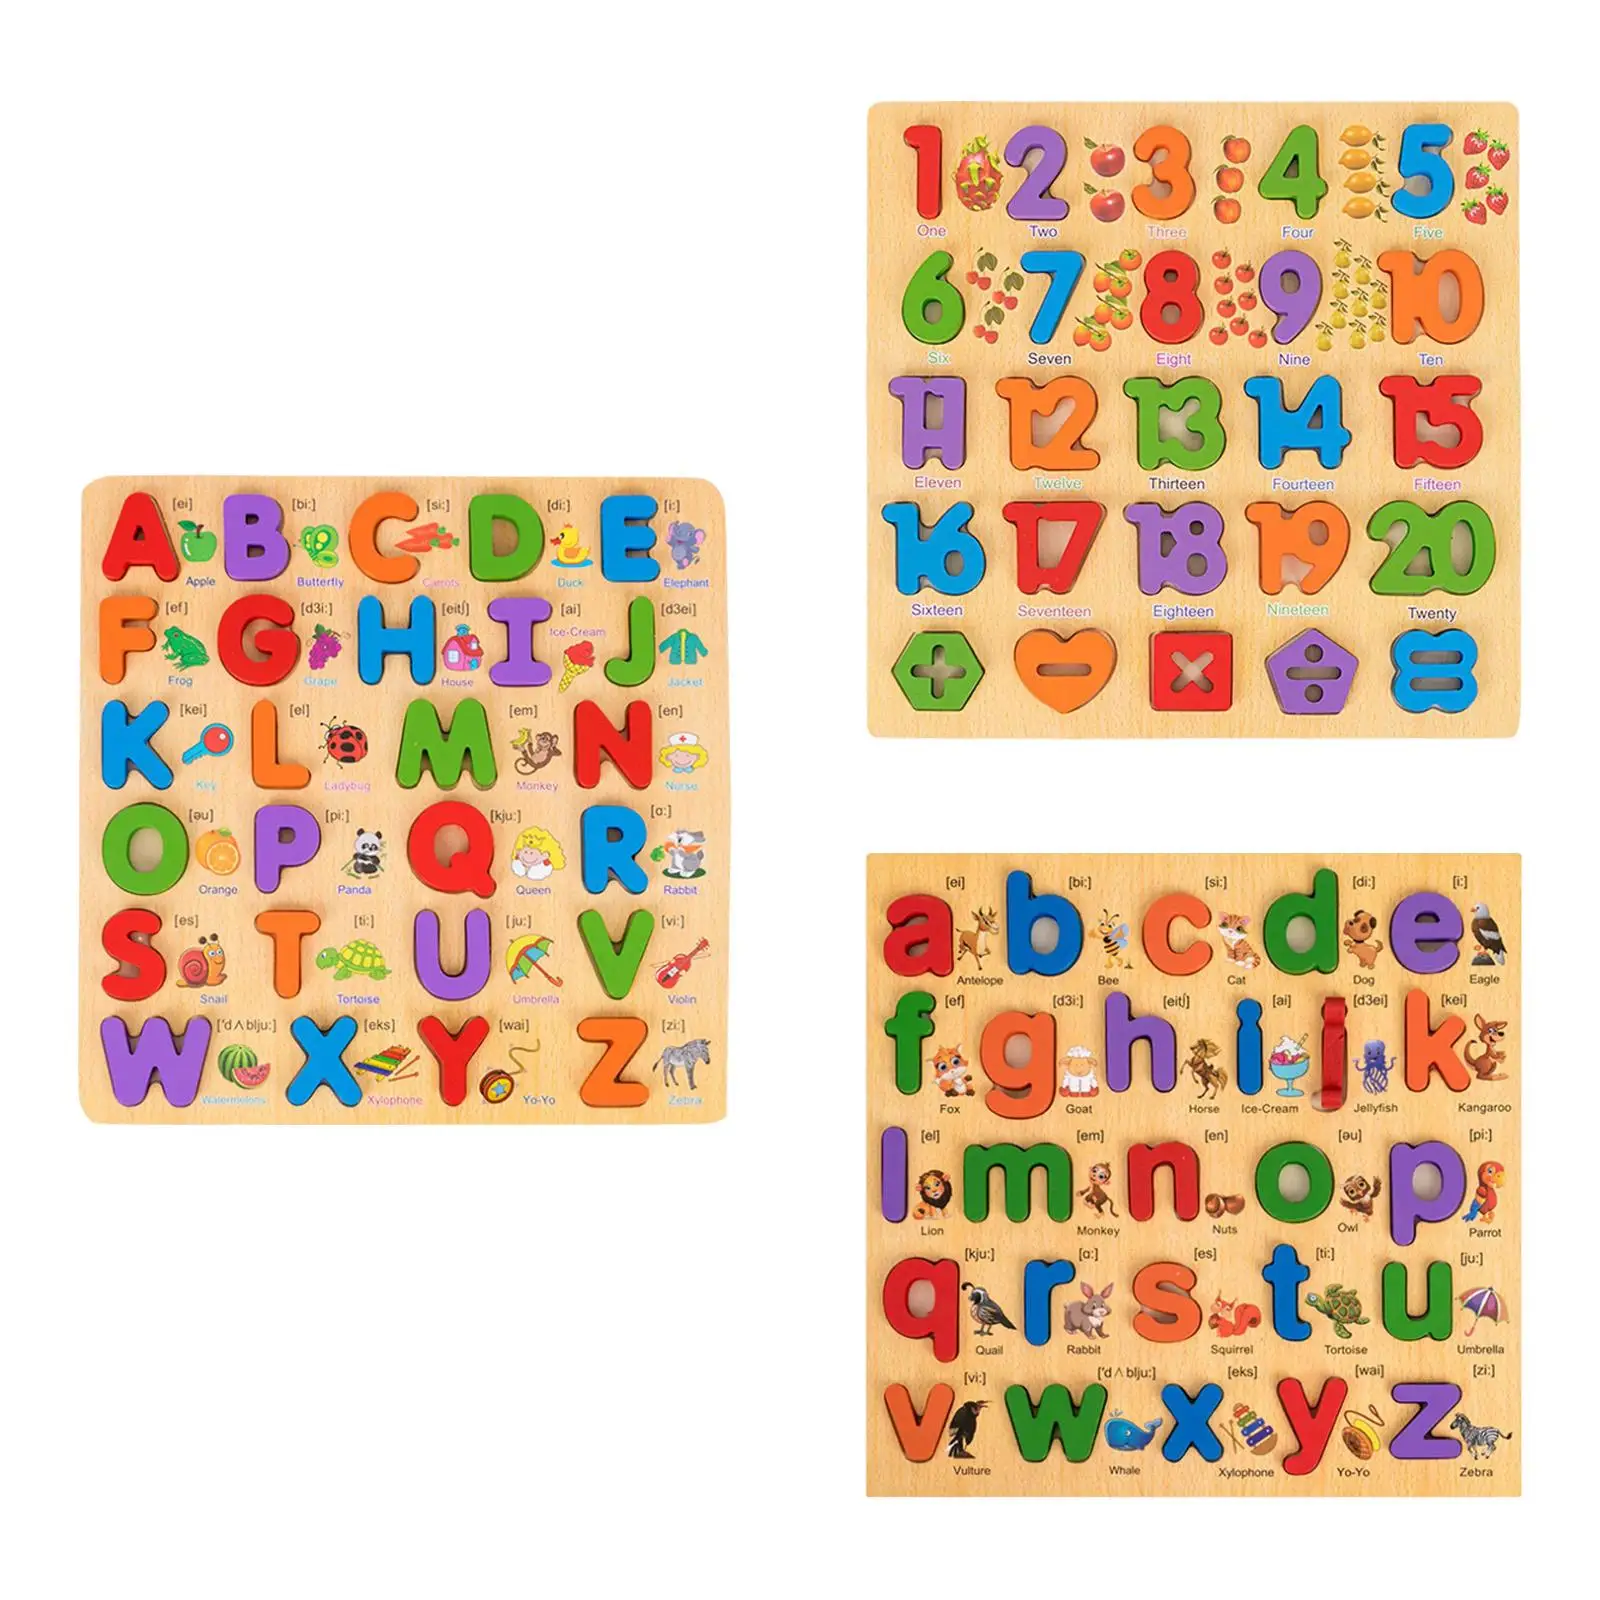 Alphabet Puzzles Gifts Learning Alphabet Practice Educational Developmental Toy Learning Alphabet Number Colorful Girls and Boys